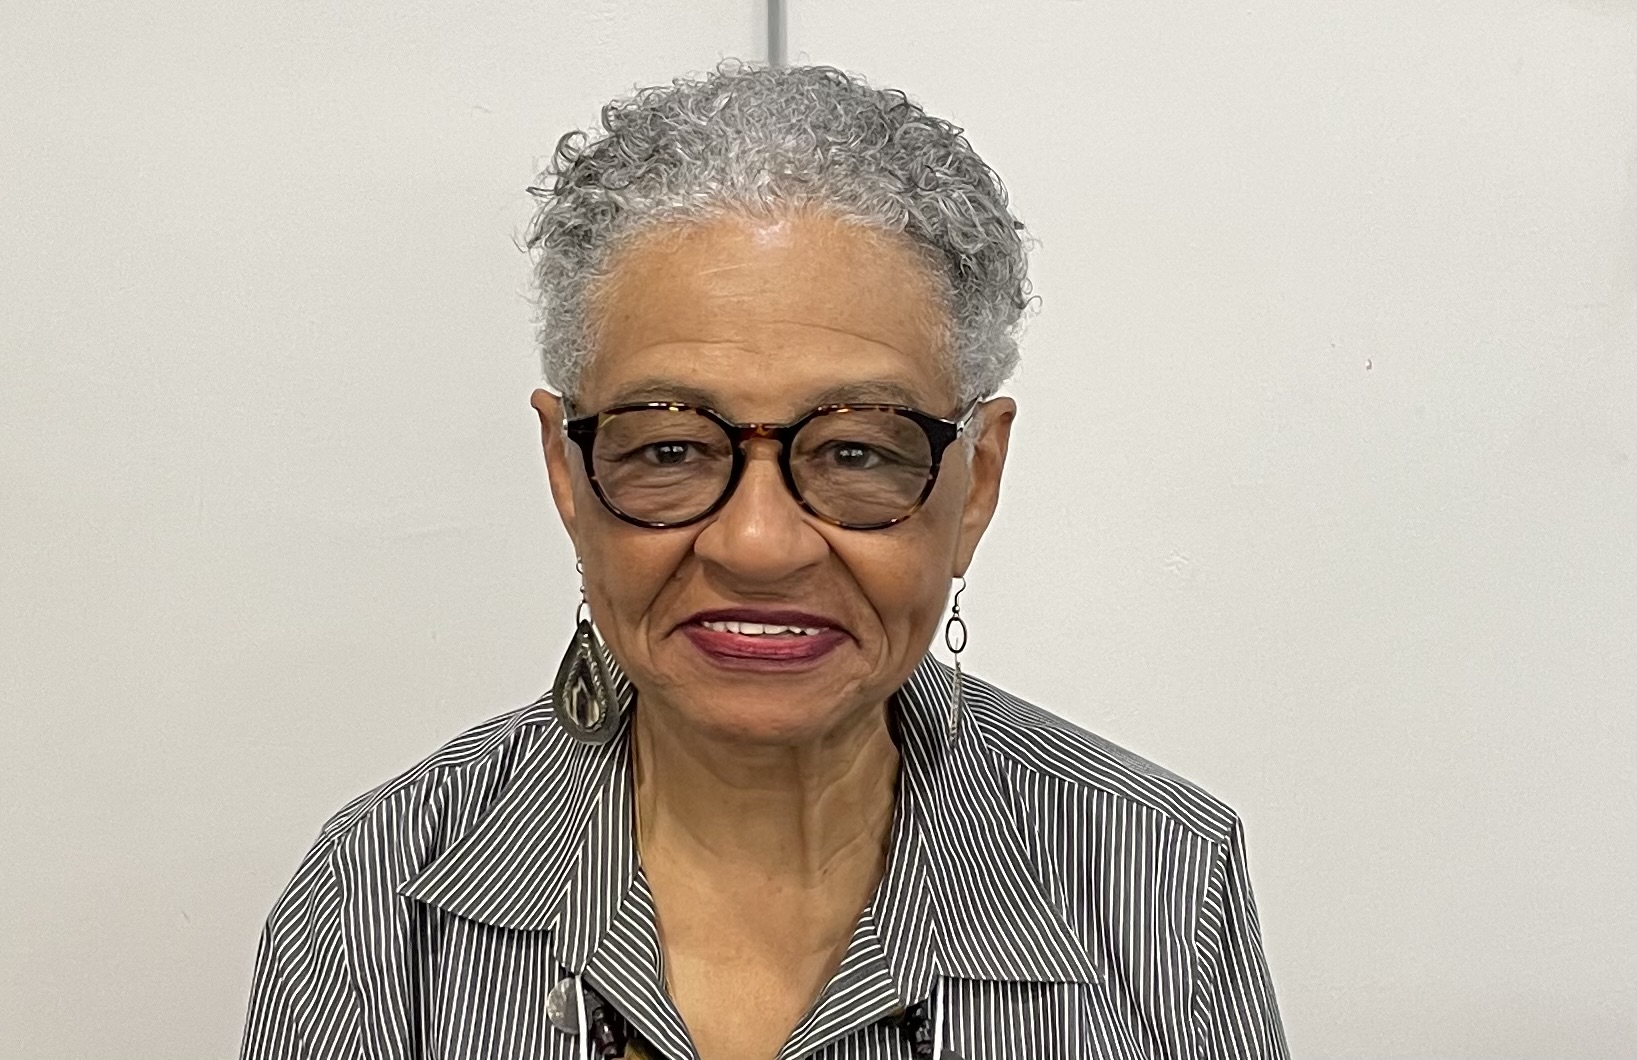 Photo of African American woman with close cropped gray hair & black framed glasses. She is smiling.